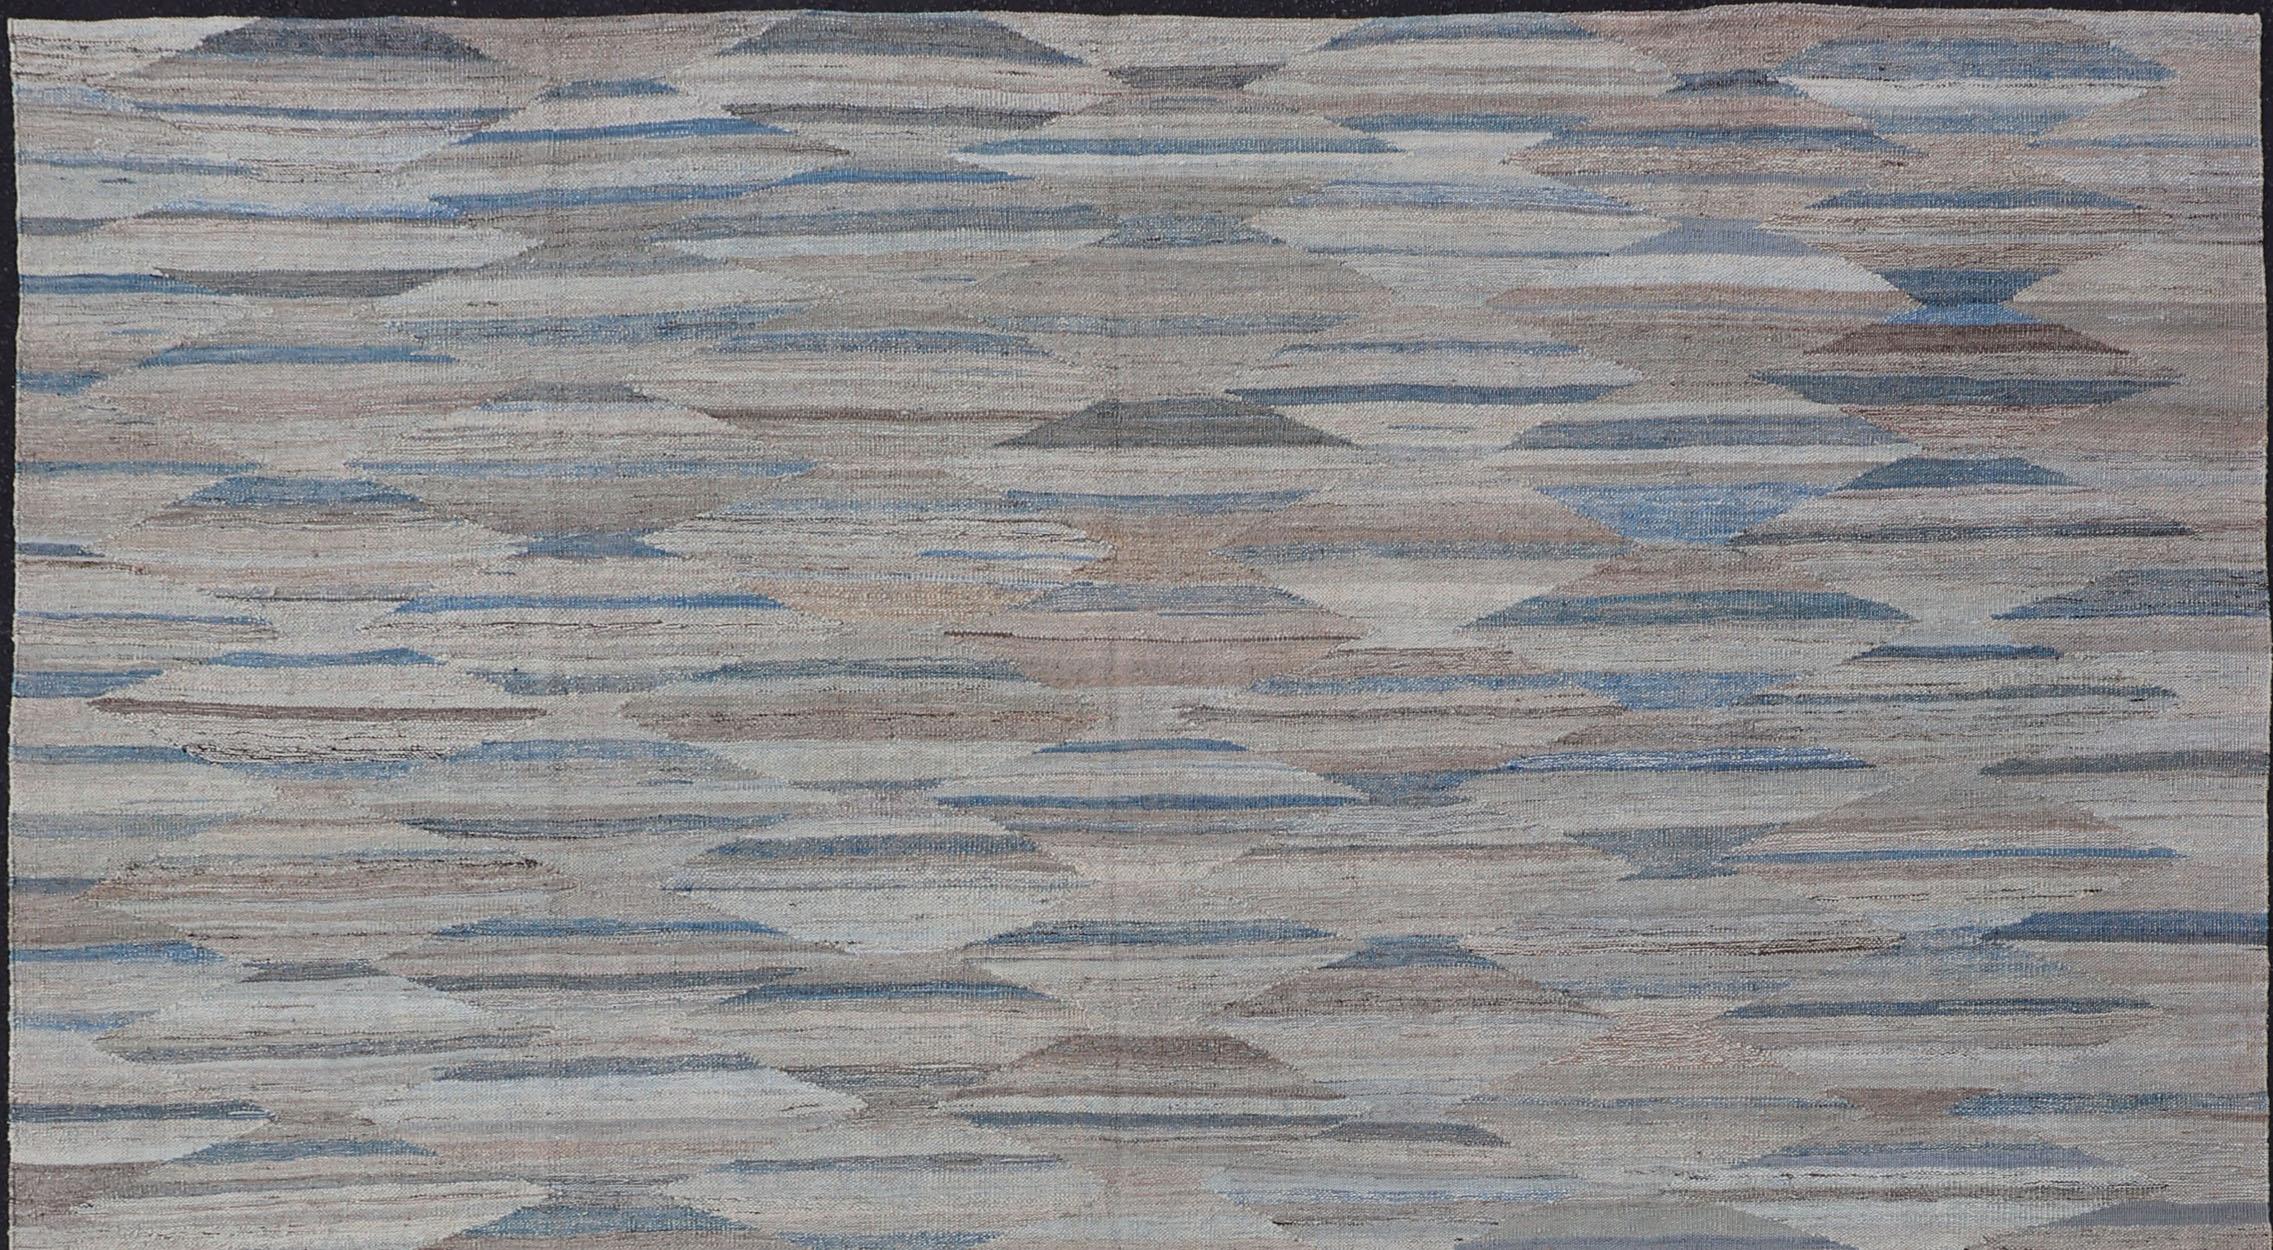 Modern and casual flat-woven Kilim rug in charcoal, gray, blue and brown diamond Afghan Modern Kilim Geometric design. Keivan Woven Arts , Rug AFG-131, country of origin / type: Afghanistan / Kilim

The unique design of this groovy flat-weave